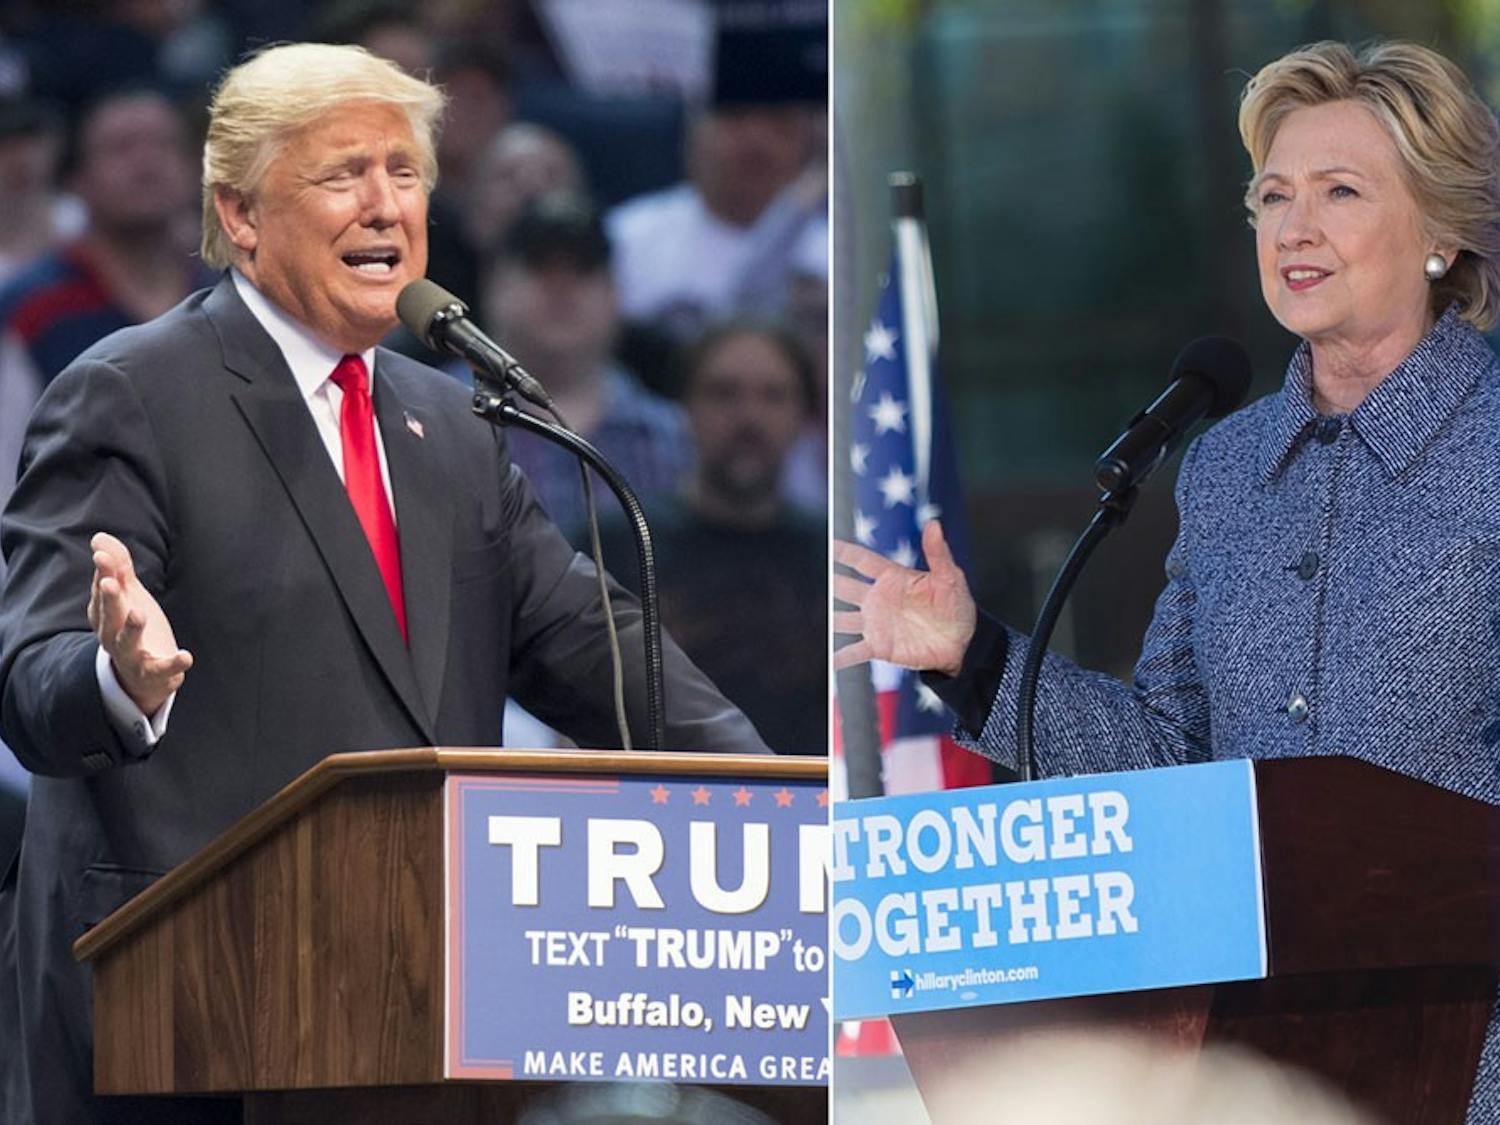 Presidential candidates Donald Trump and Hillary Clinton speak at their rallies. UB professors discuss what voters should be paying attention to for the upcoming election.&nbsp;